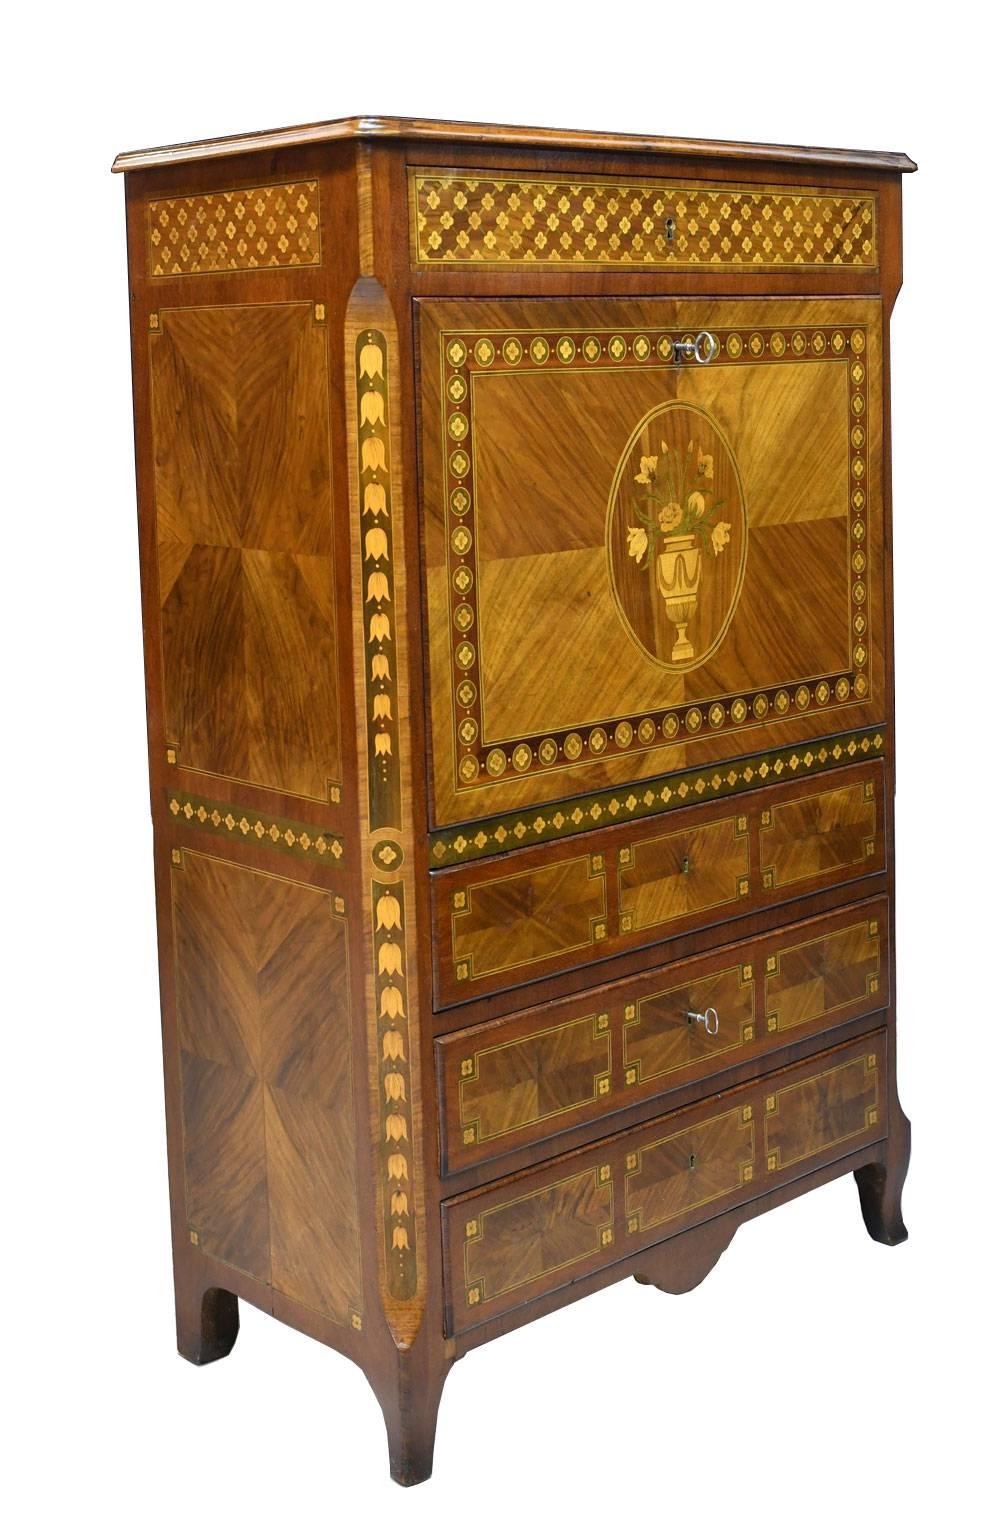 Kingwood Spanish Charles IV Secretary with Contrasting Marquetry over Mahogany, c. 1800